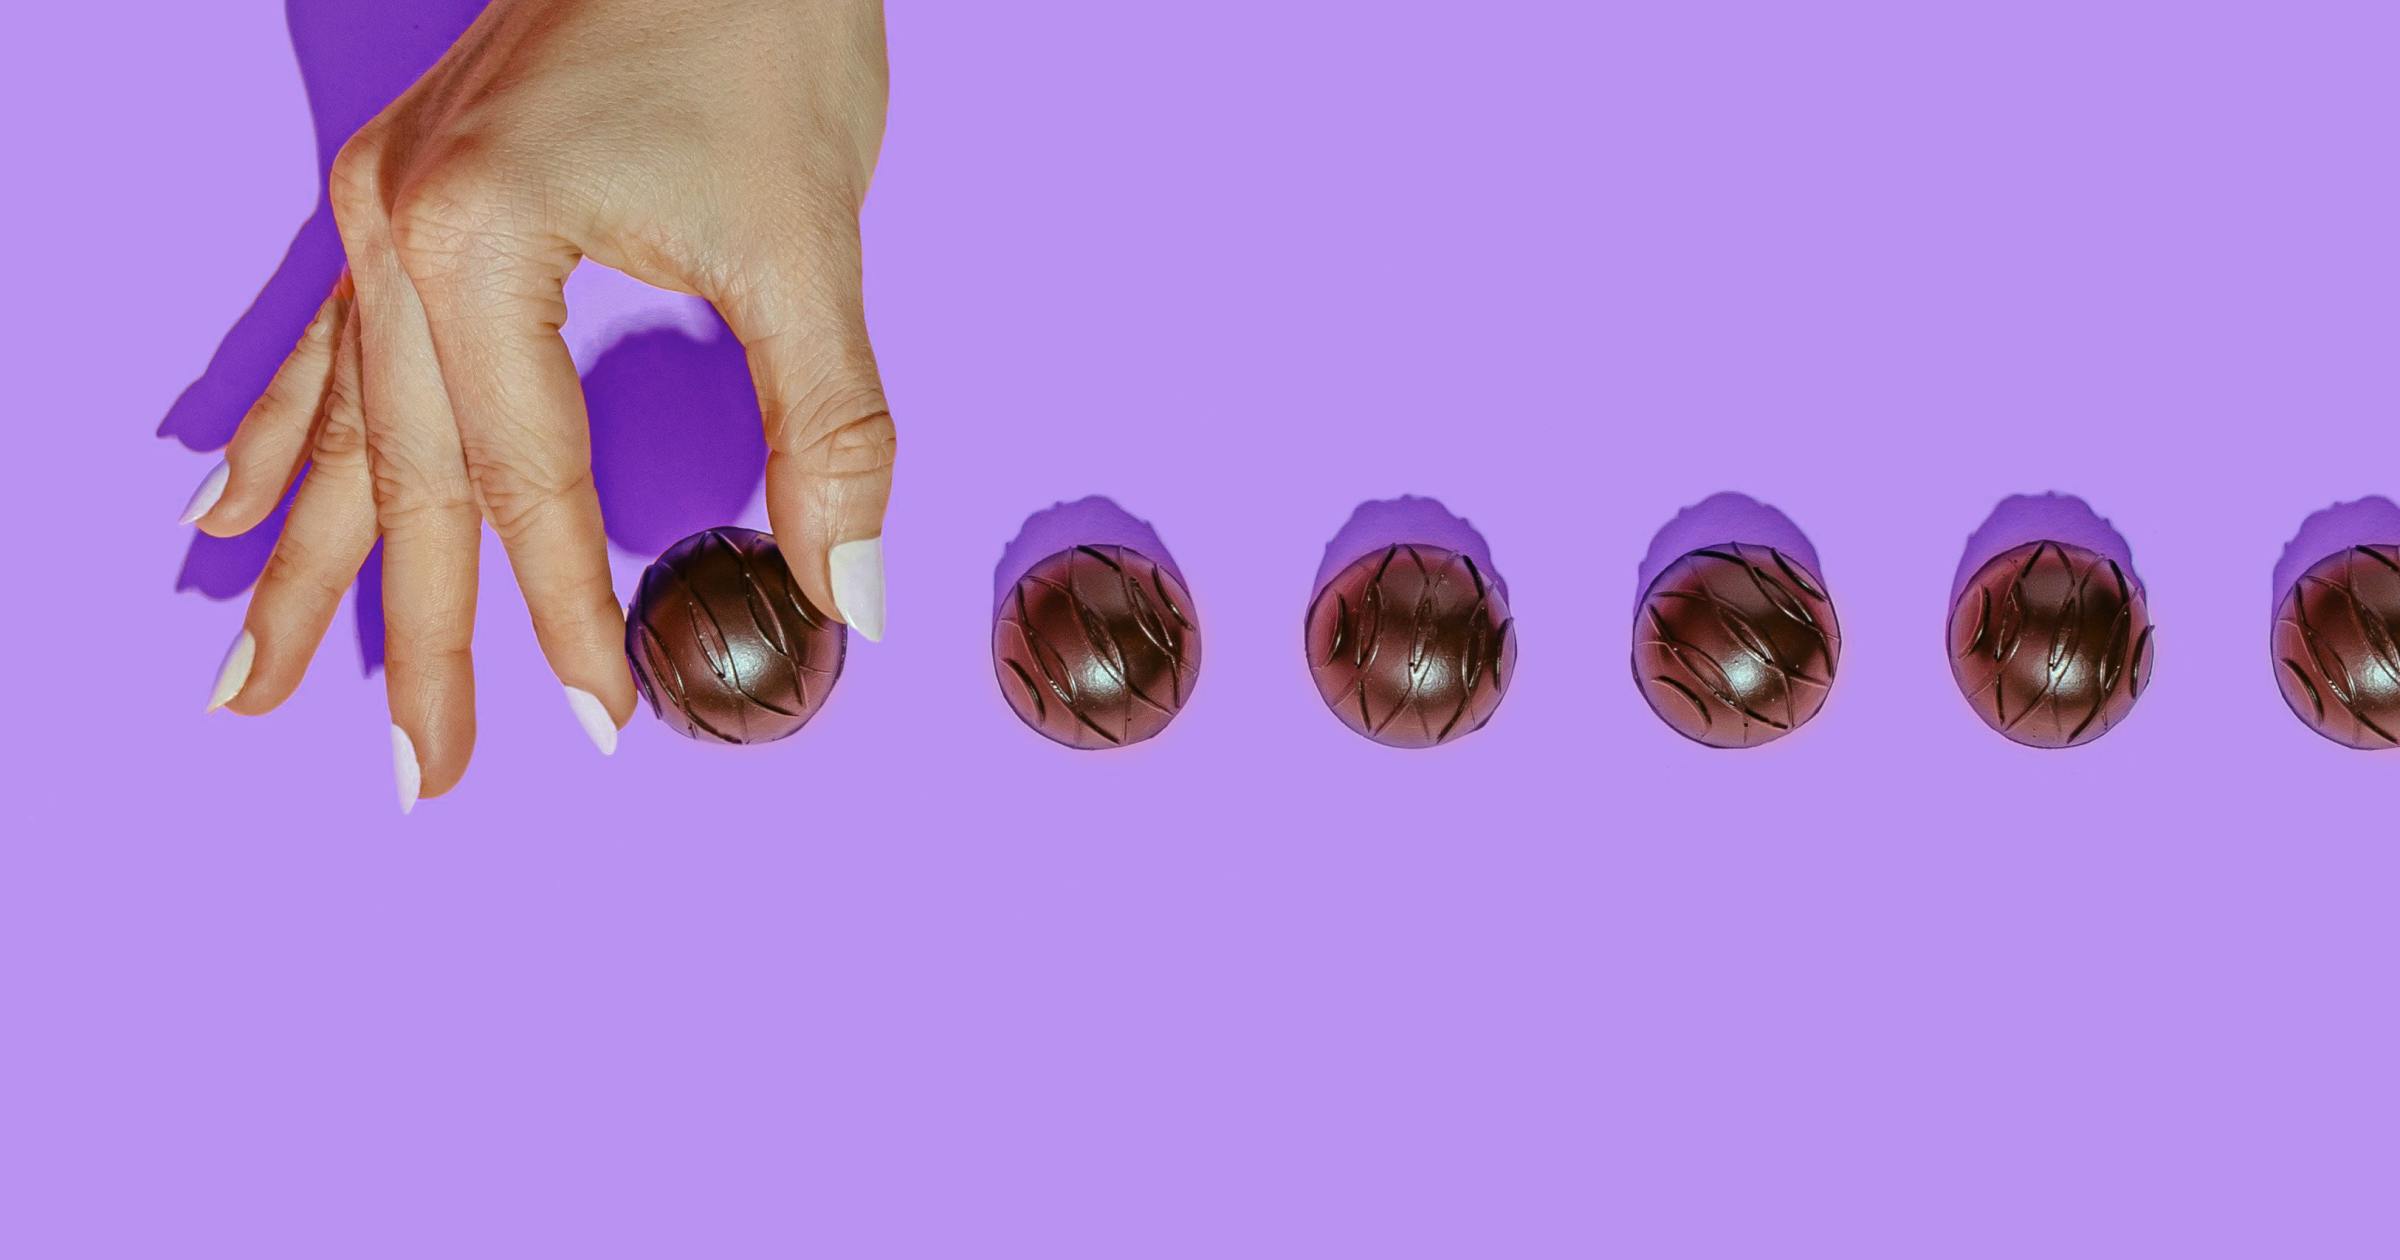 Woman with white fingernail polish holding a chocolate truffle and other chocolate truffles lined up next to it with a purple background